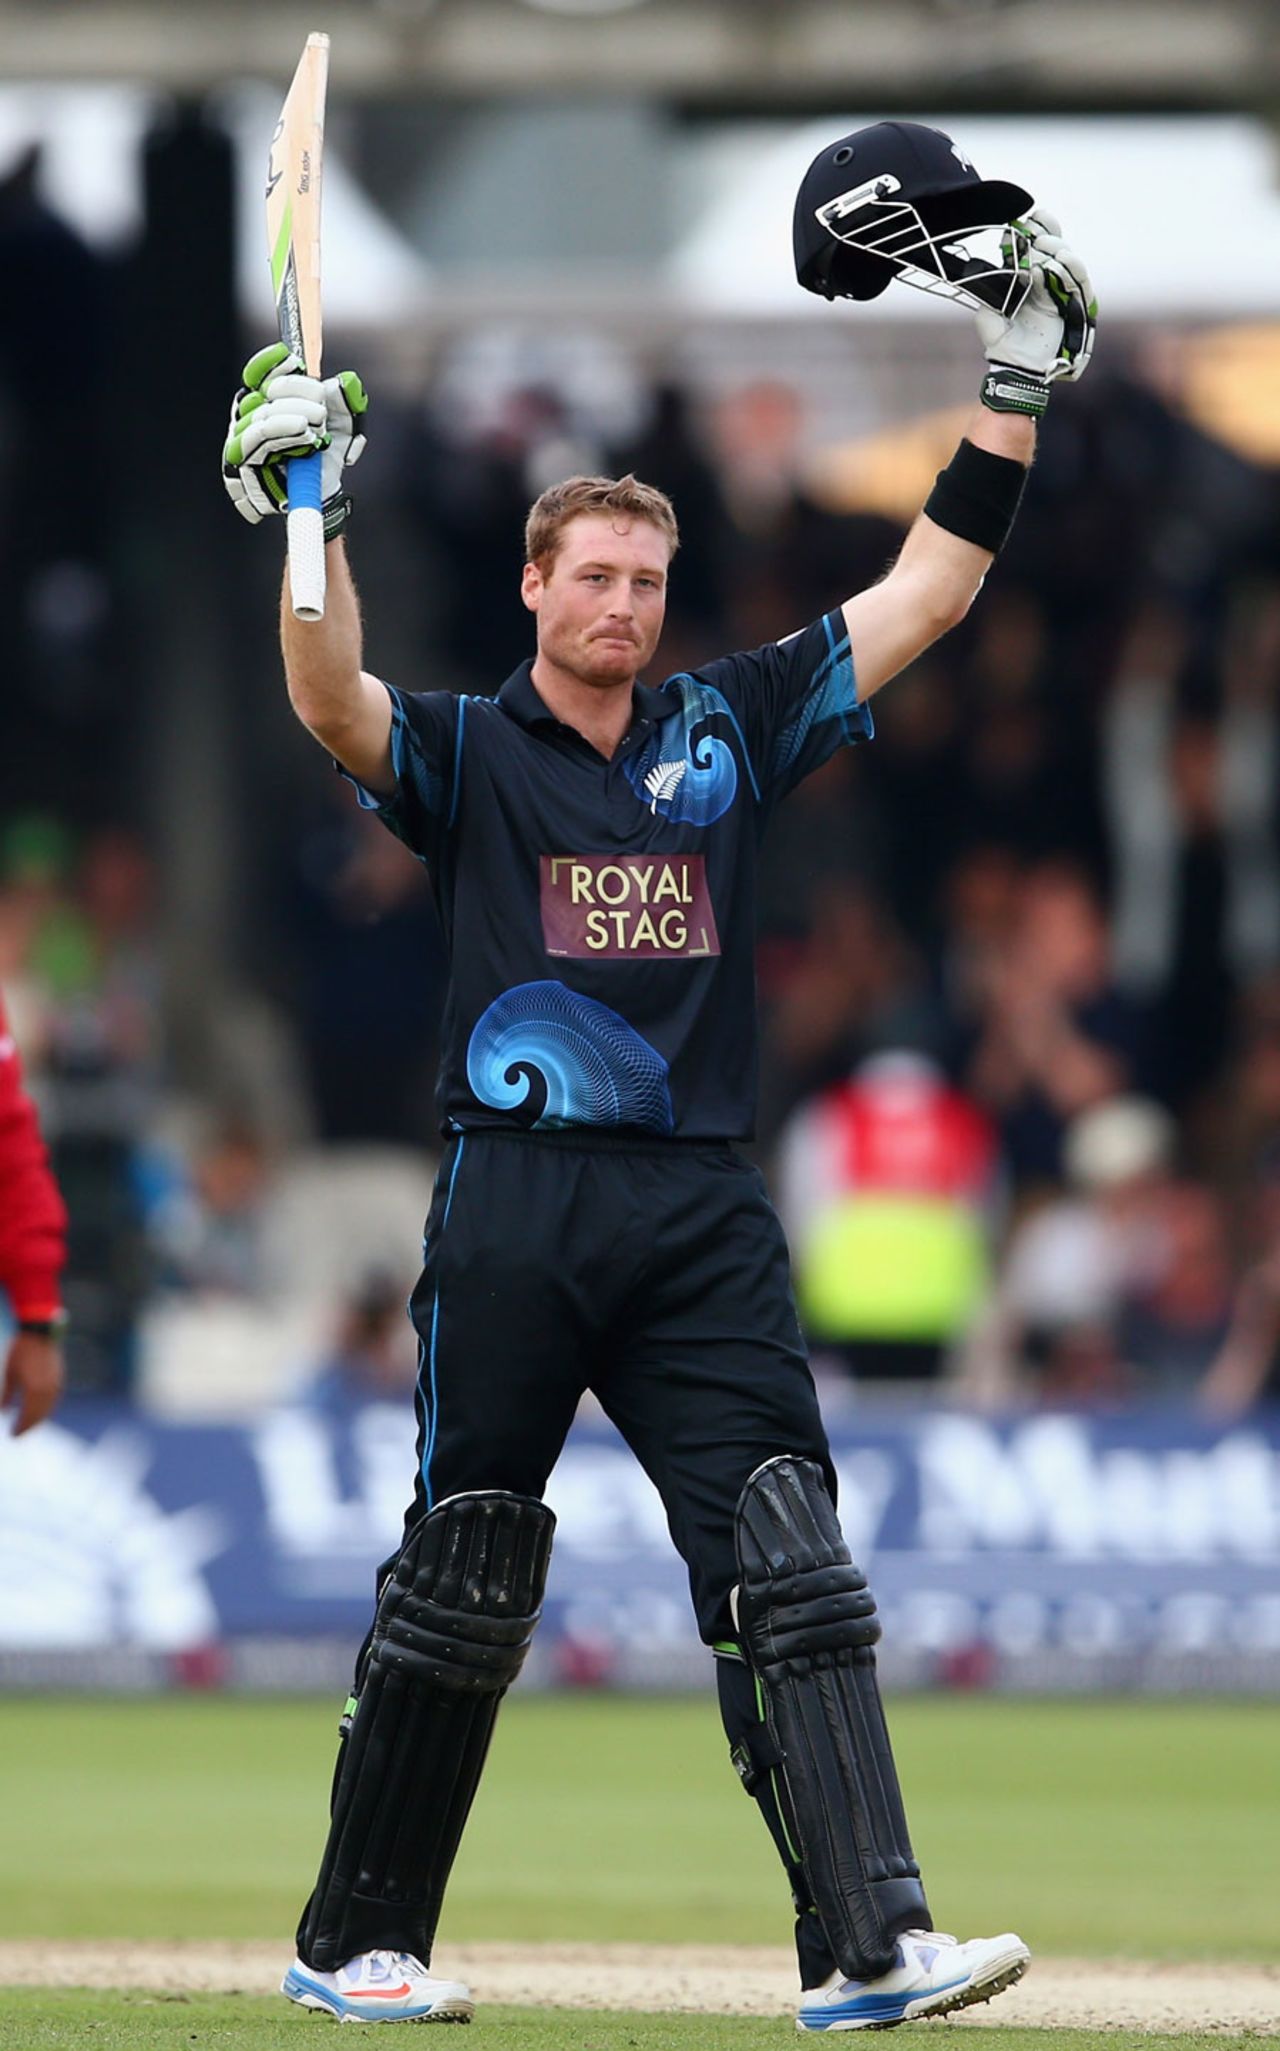 Martin Guptill hit the winning runs and also reached his century, England v New Zealand, 1st ODI, Lord's, May 31, 2013